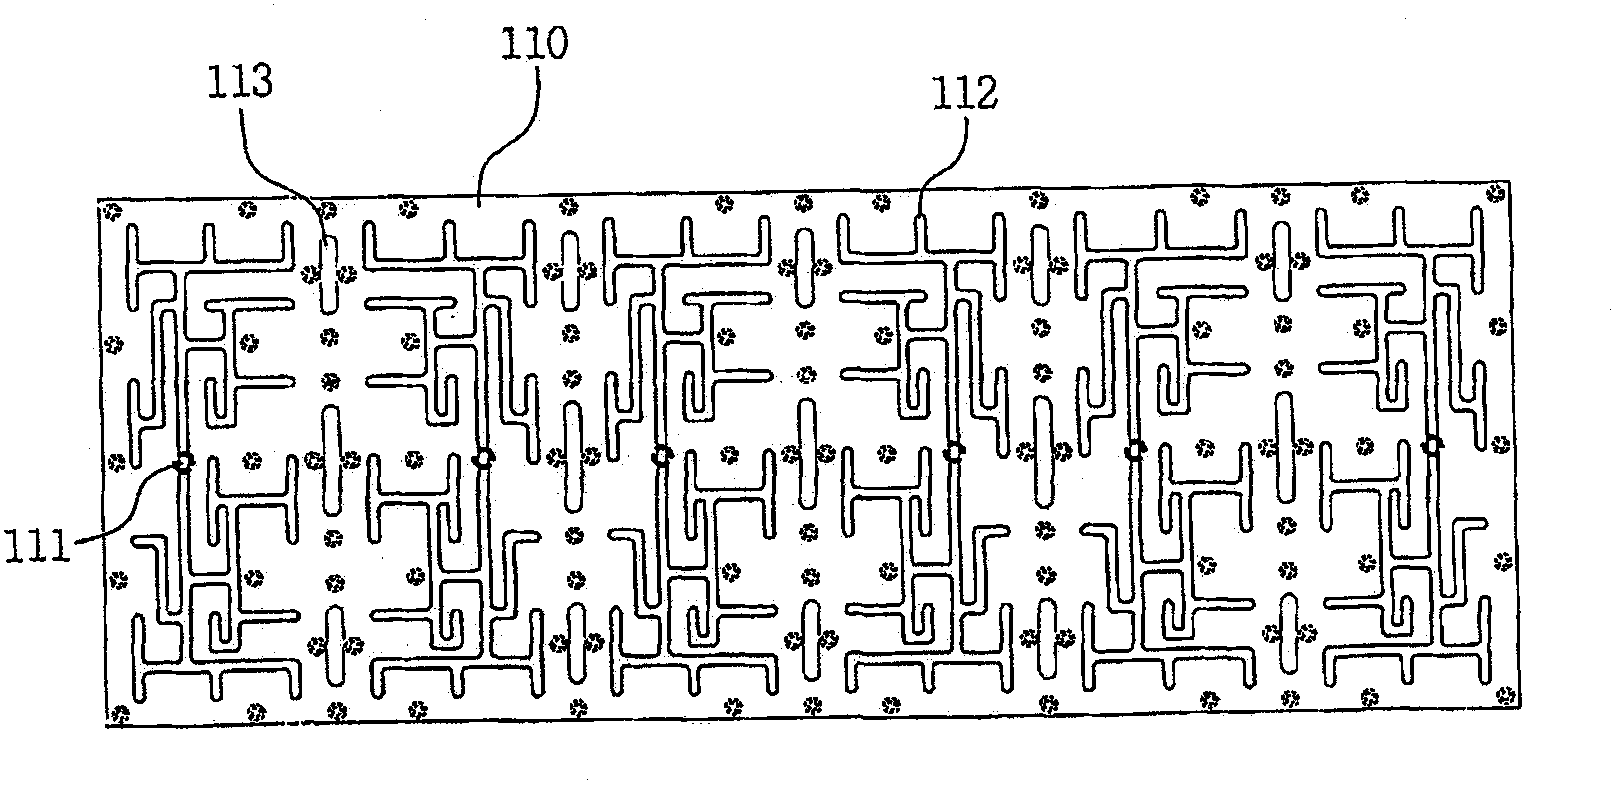 Non-contact type conveyor plate having a suction force